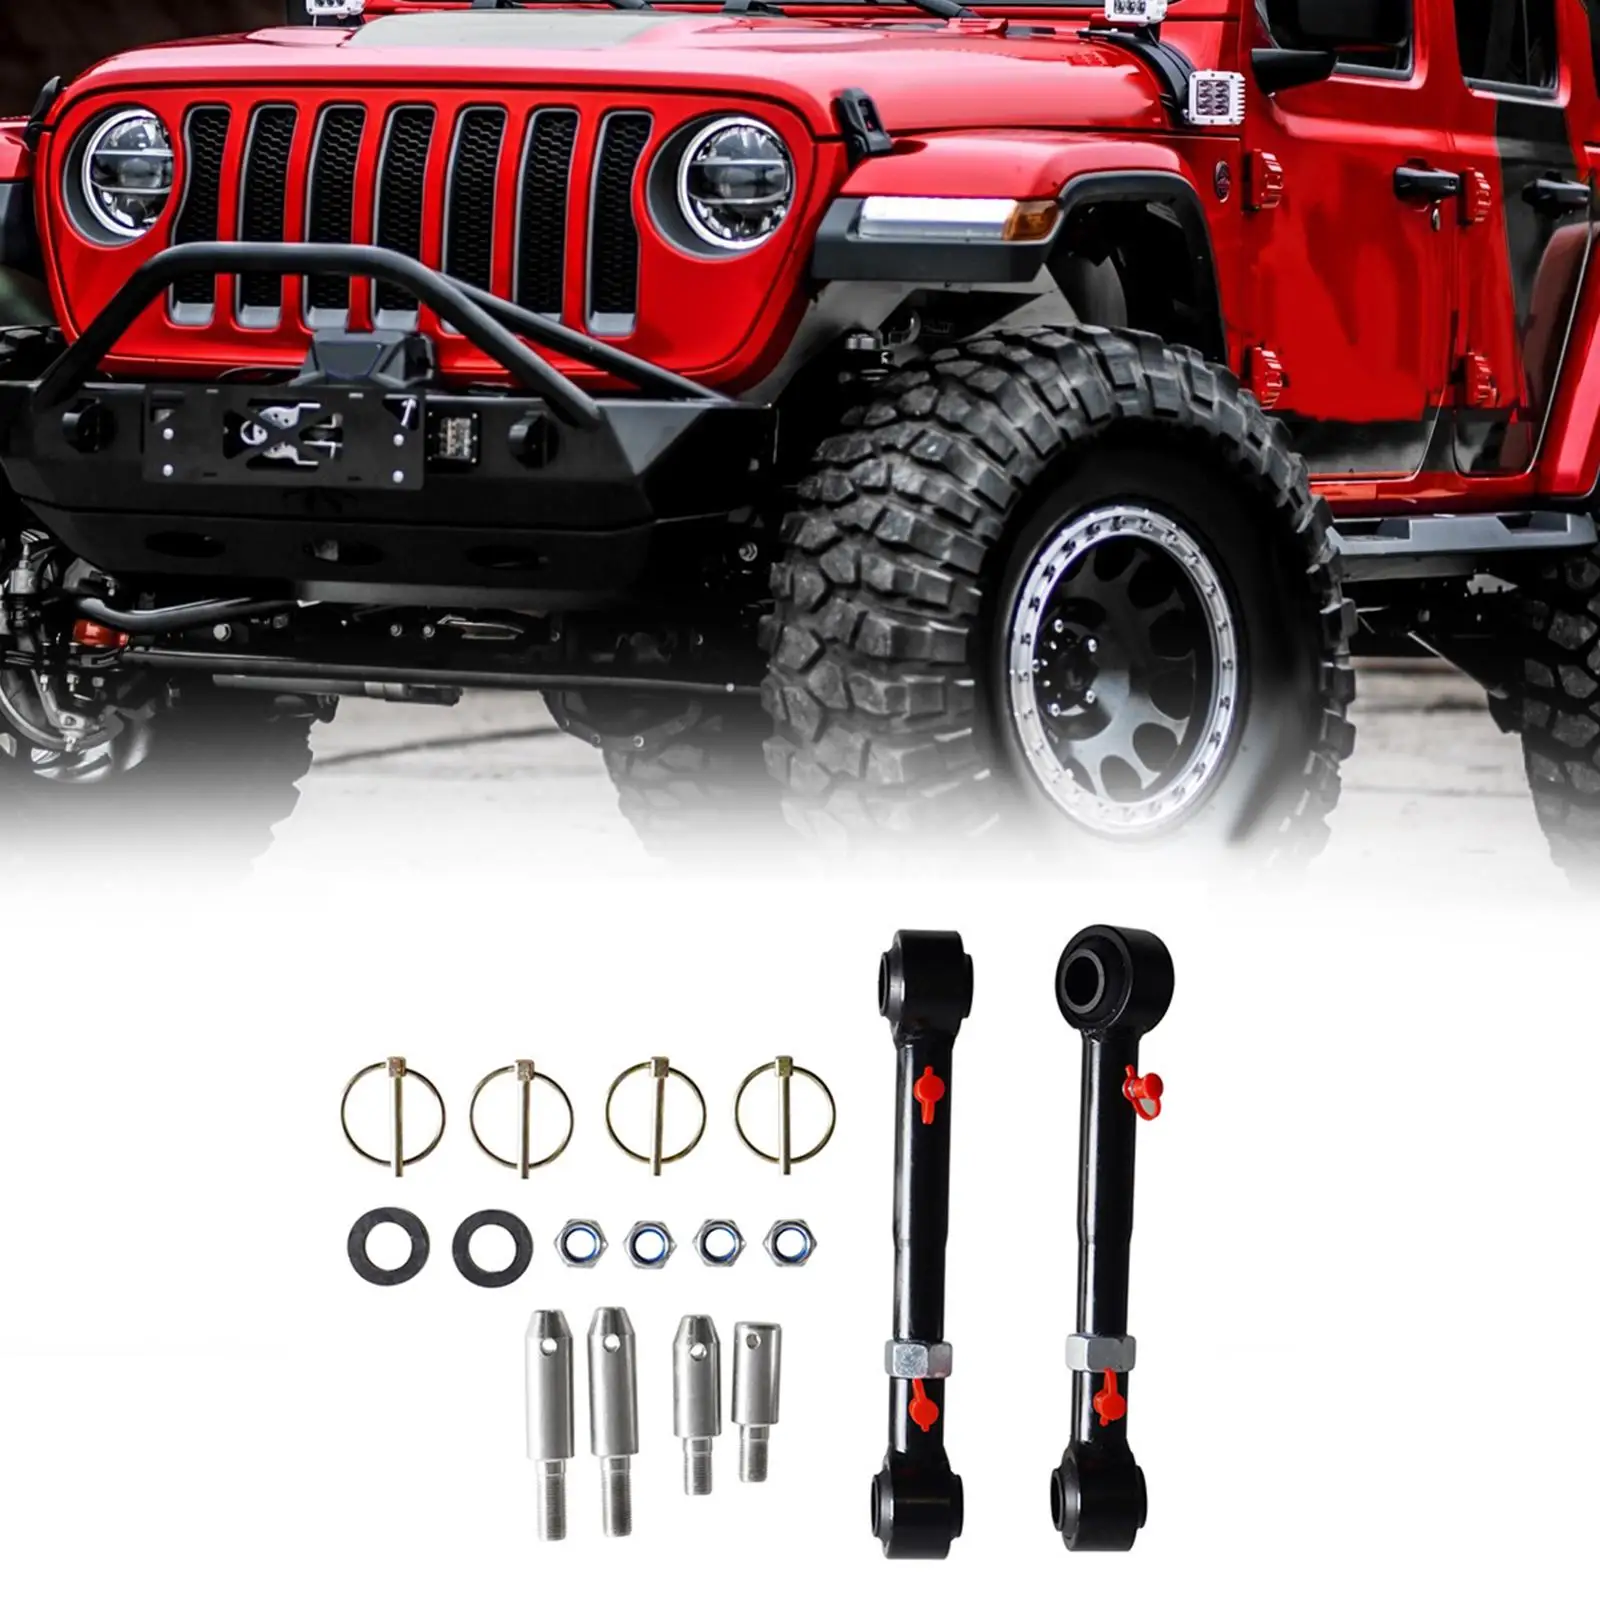 

Adjustable Front Sway Bar Link Spare Parts Assembly Replaces Front Swaybar Quicker Disconnect System for Jeep JK 2007-2018